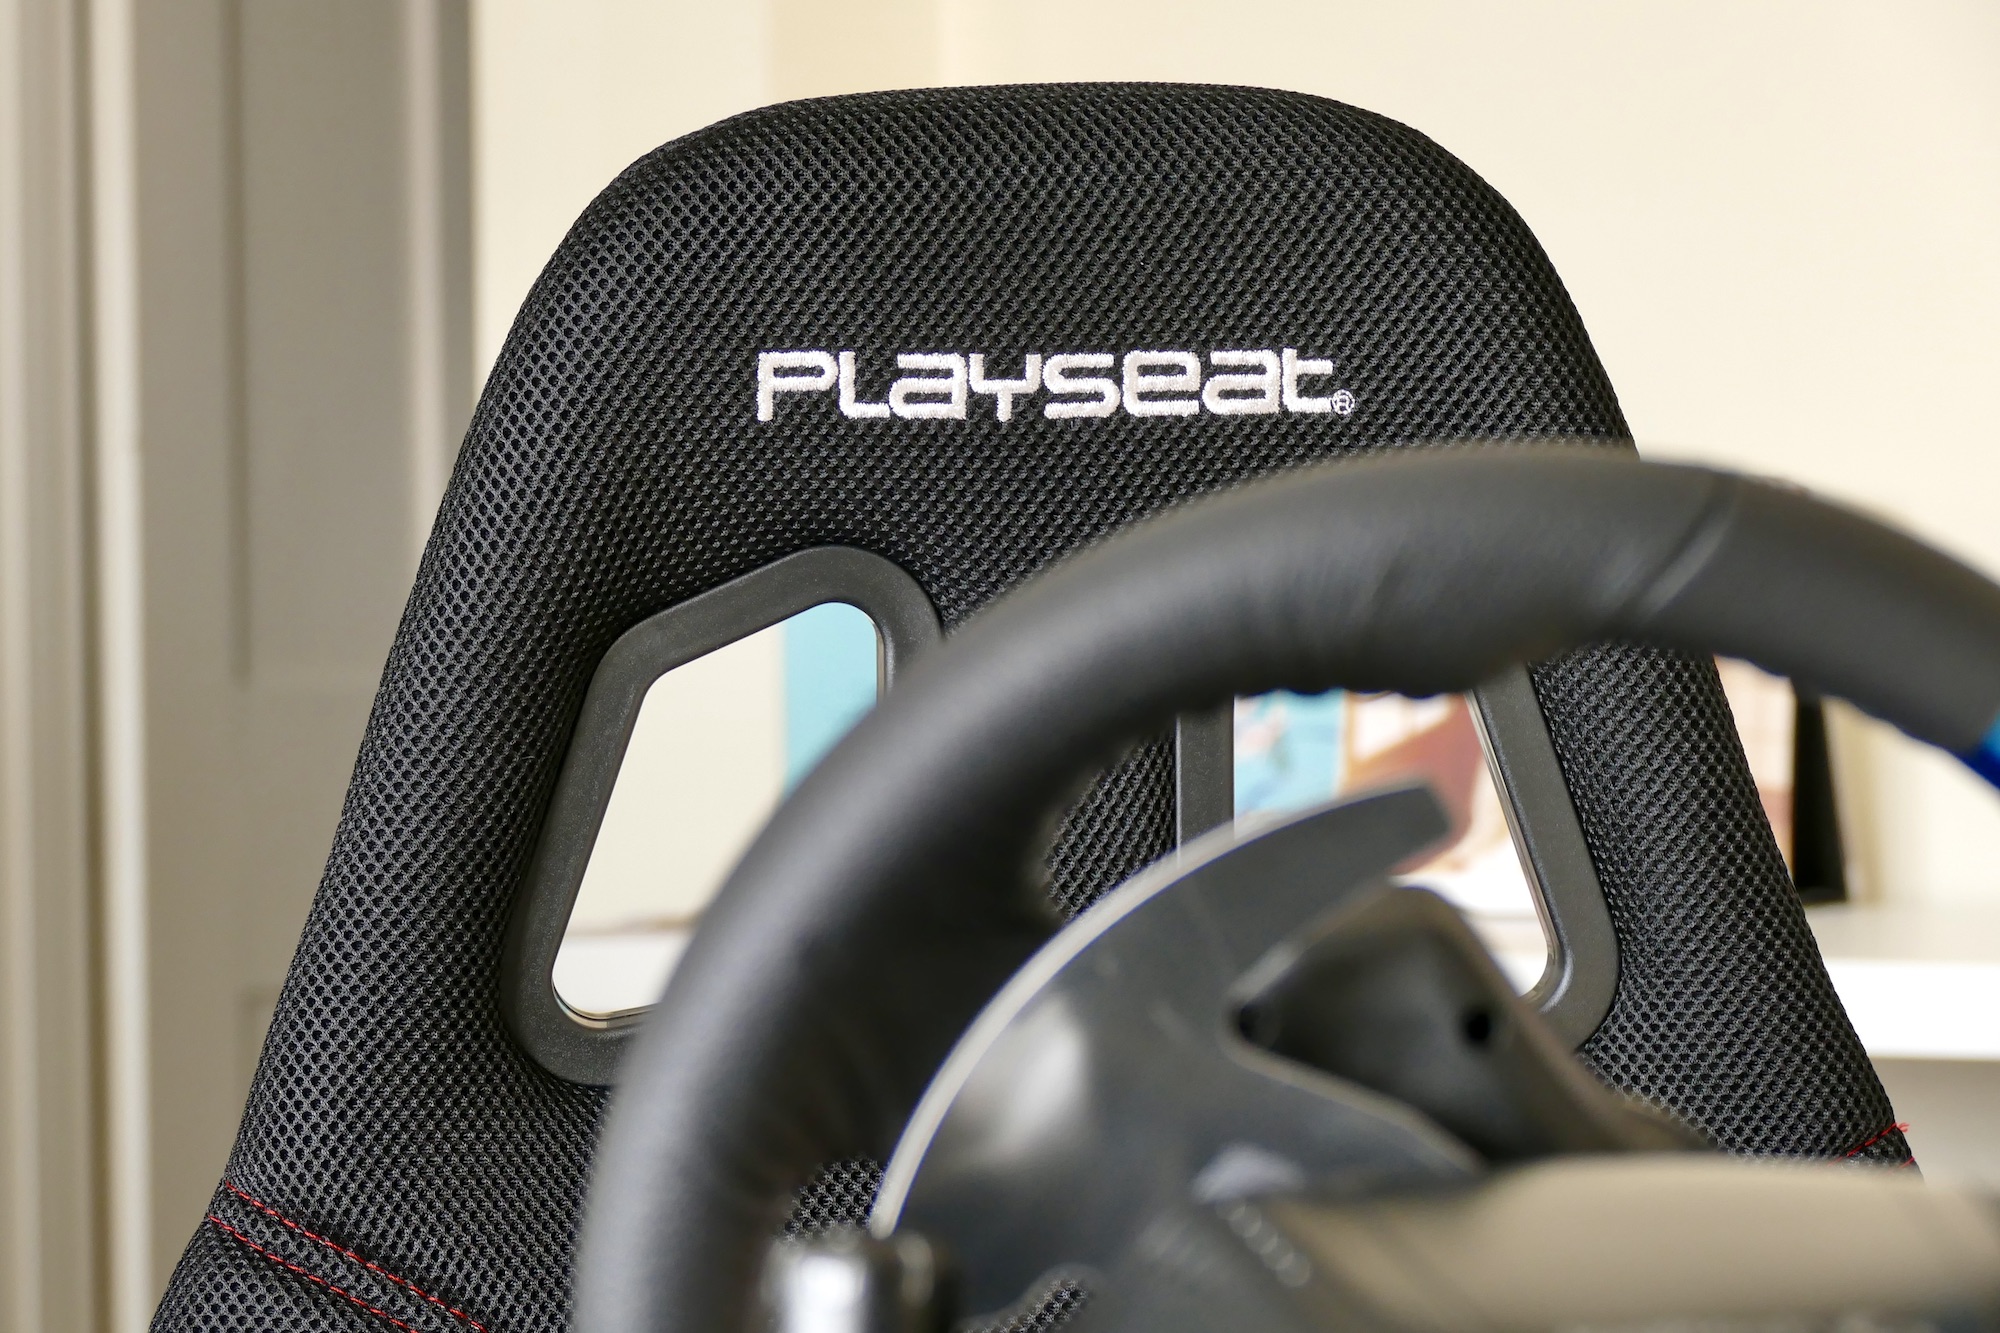 PlaySeat Challenge logo on the seat back.